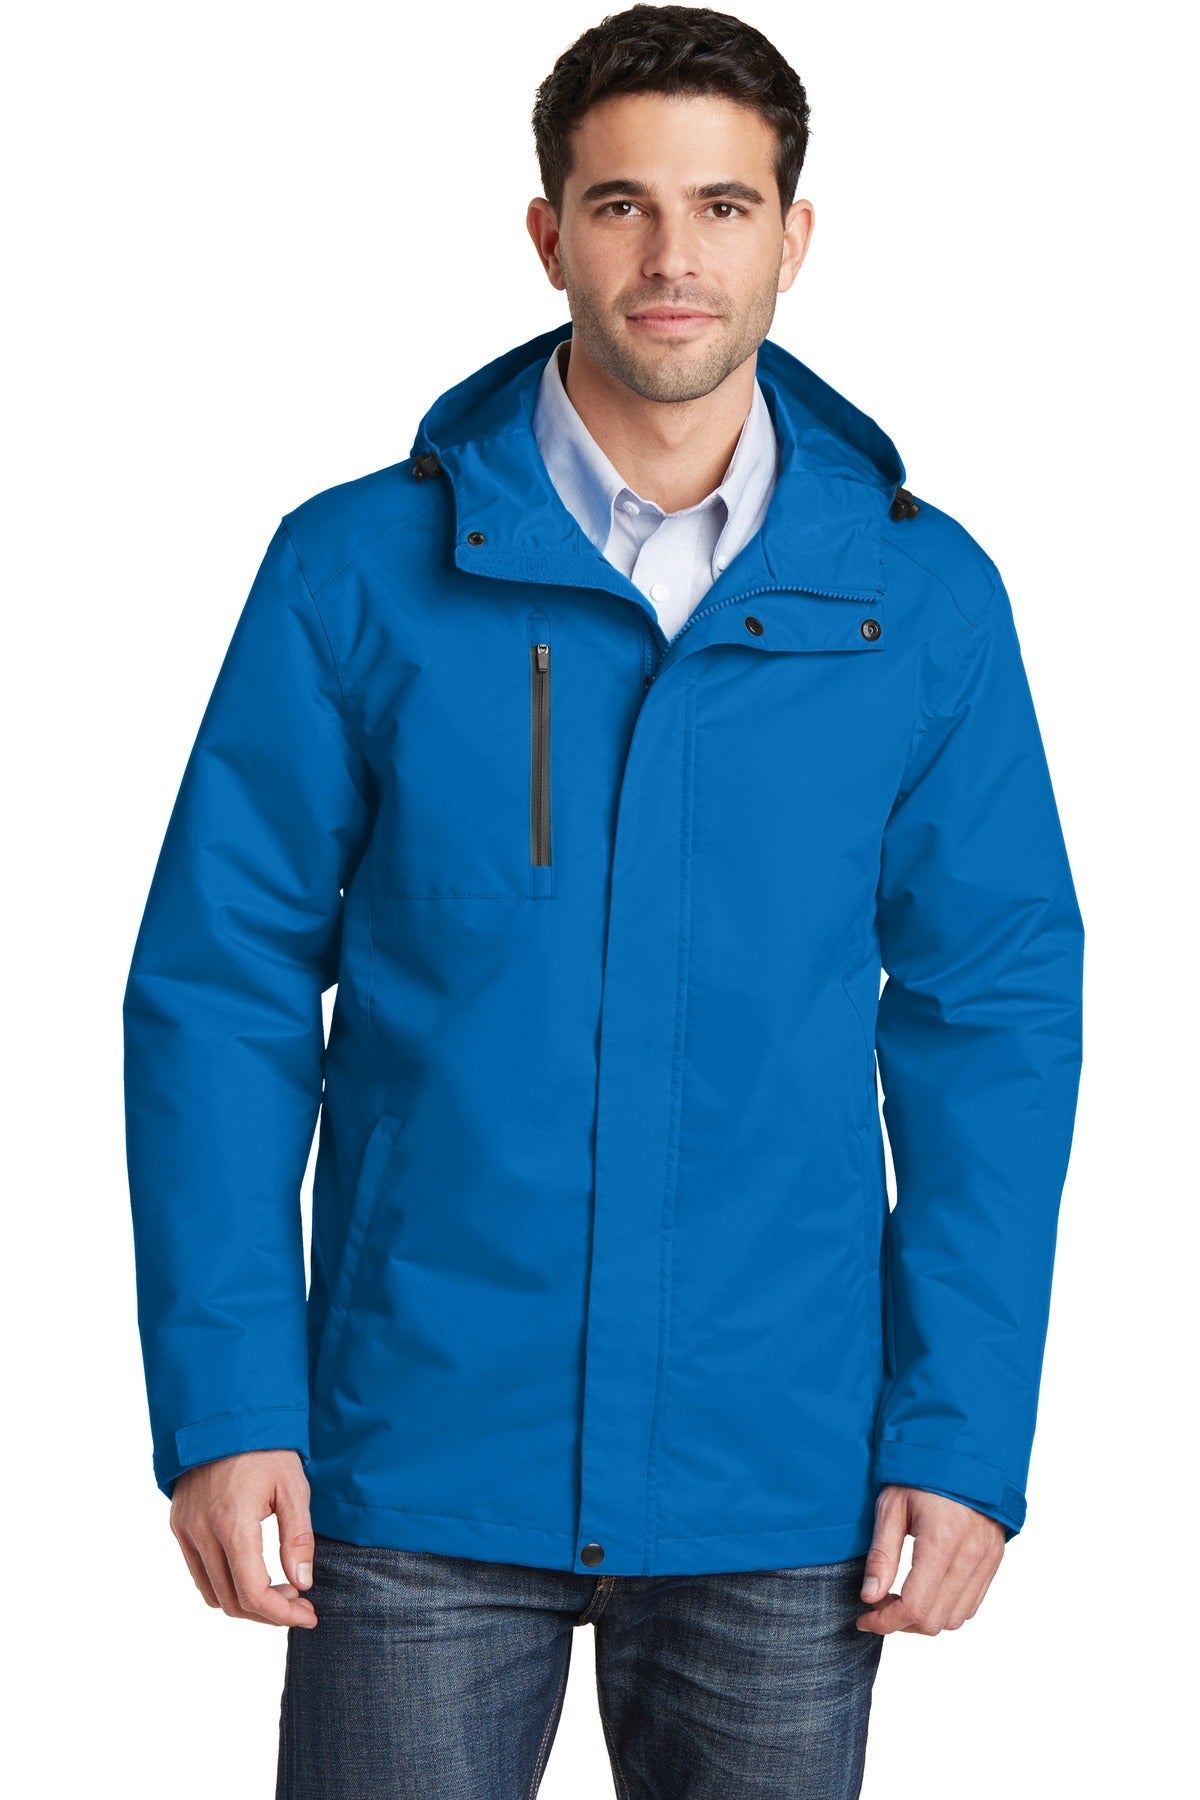 Port Authority® All-Conditions Jacket. J331 - DFW Impression